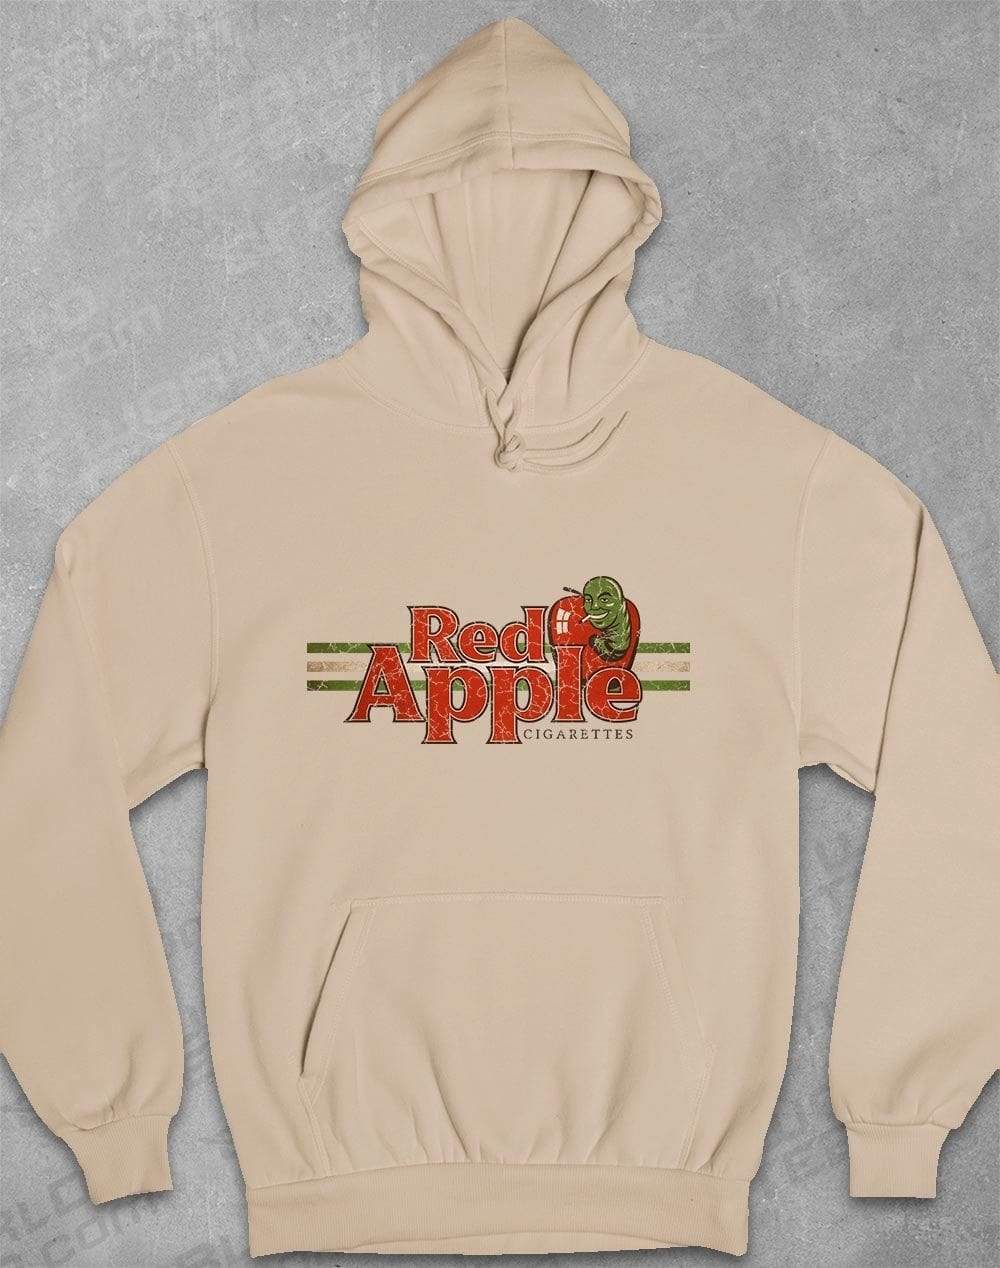 Red Apple Cigarettes Hoodie S / DesertSand  - Off World Tees